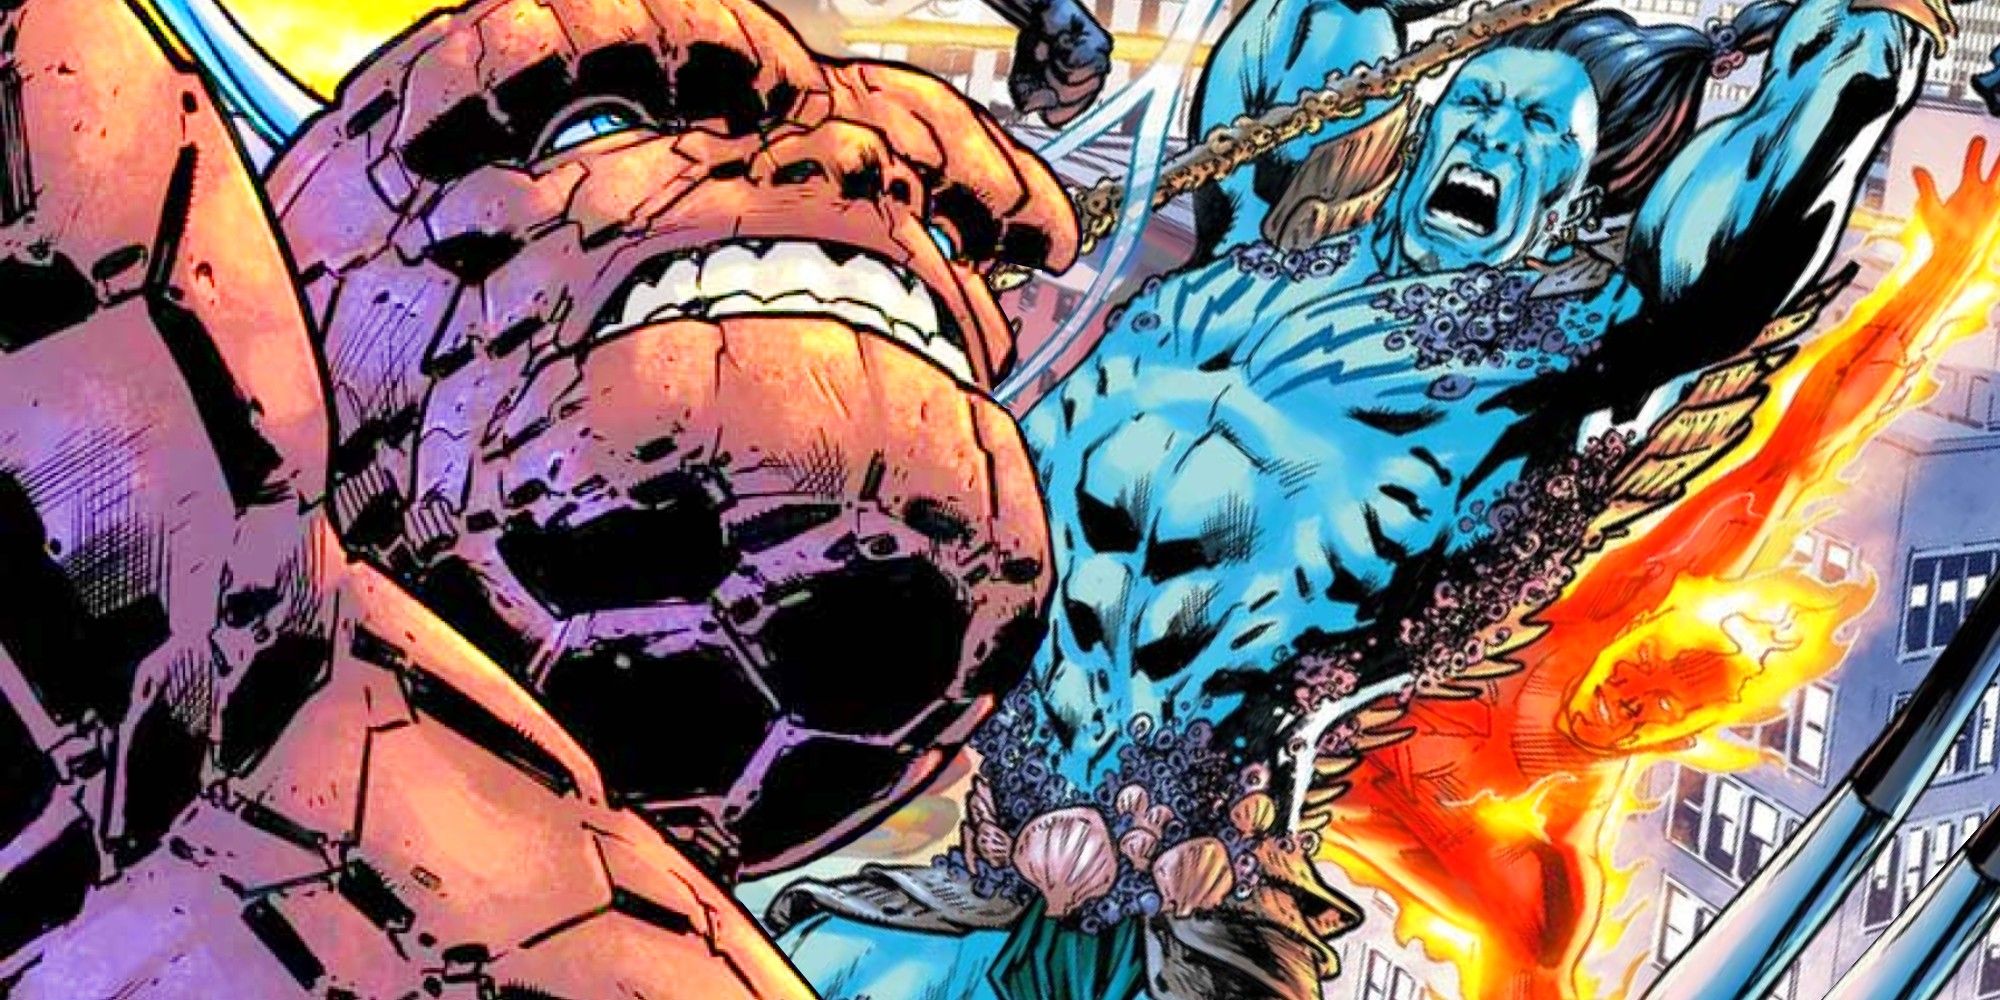 Giant Sized Fantastic Four 1 featured